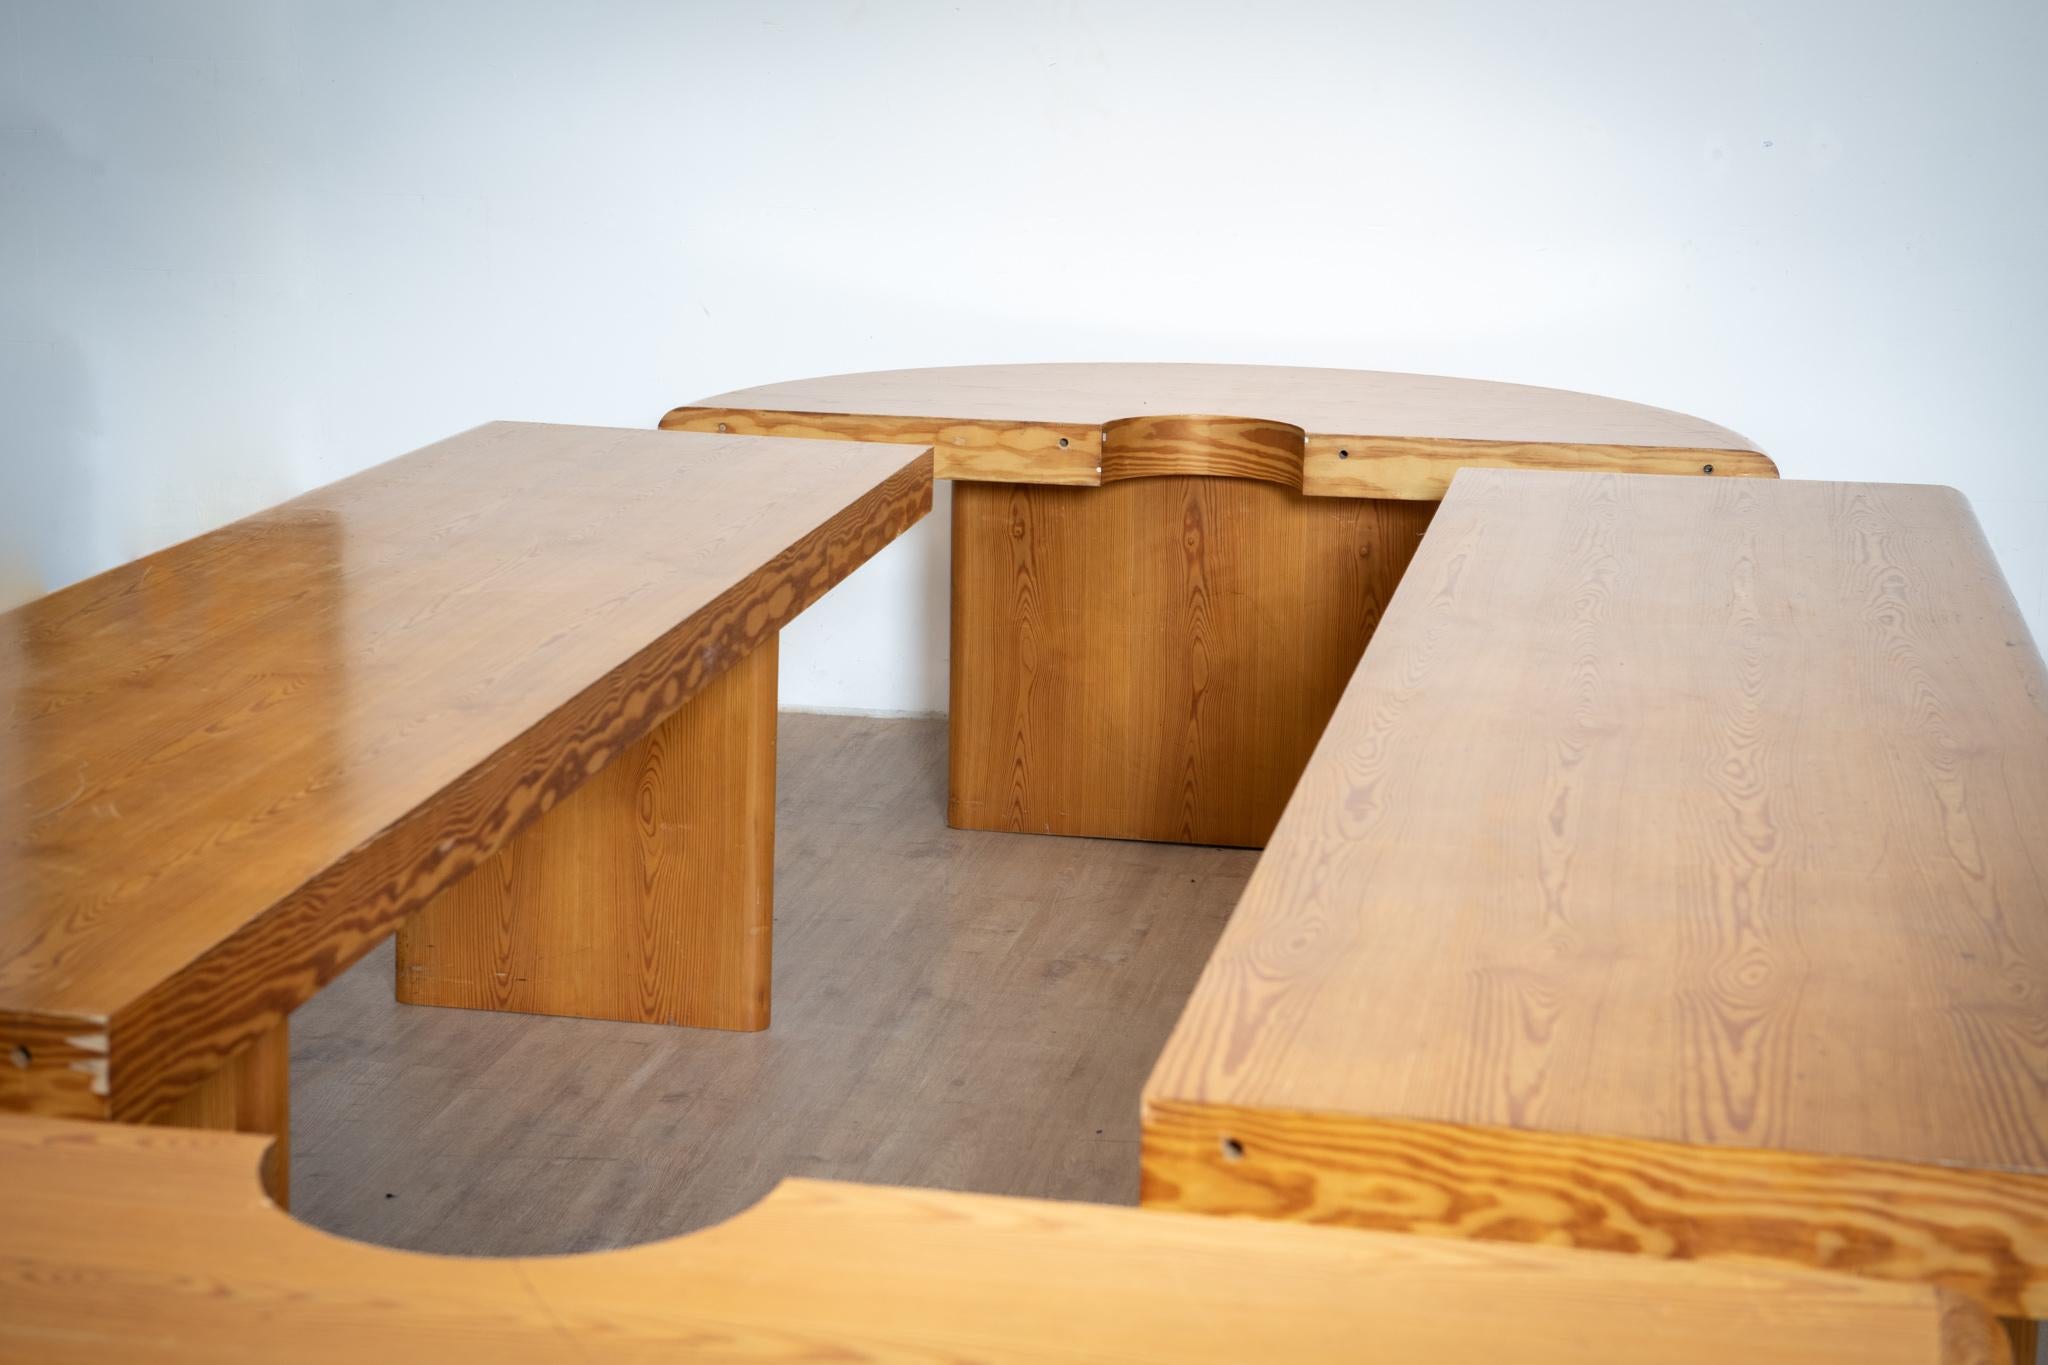 Important pine conference table by Rainer Daumiller for Hirtshals Savværk møbler in the 1980s. The table consists of 2 rectangular tables and 2 half-moon consoles. The table comes from the board room of a Milanese company that had specially ordered